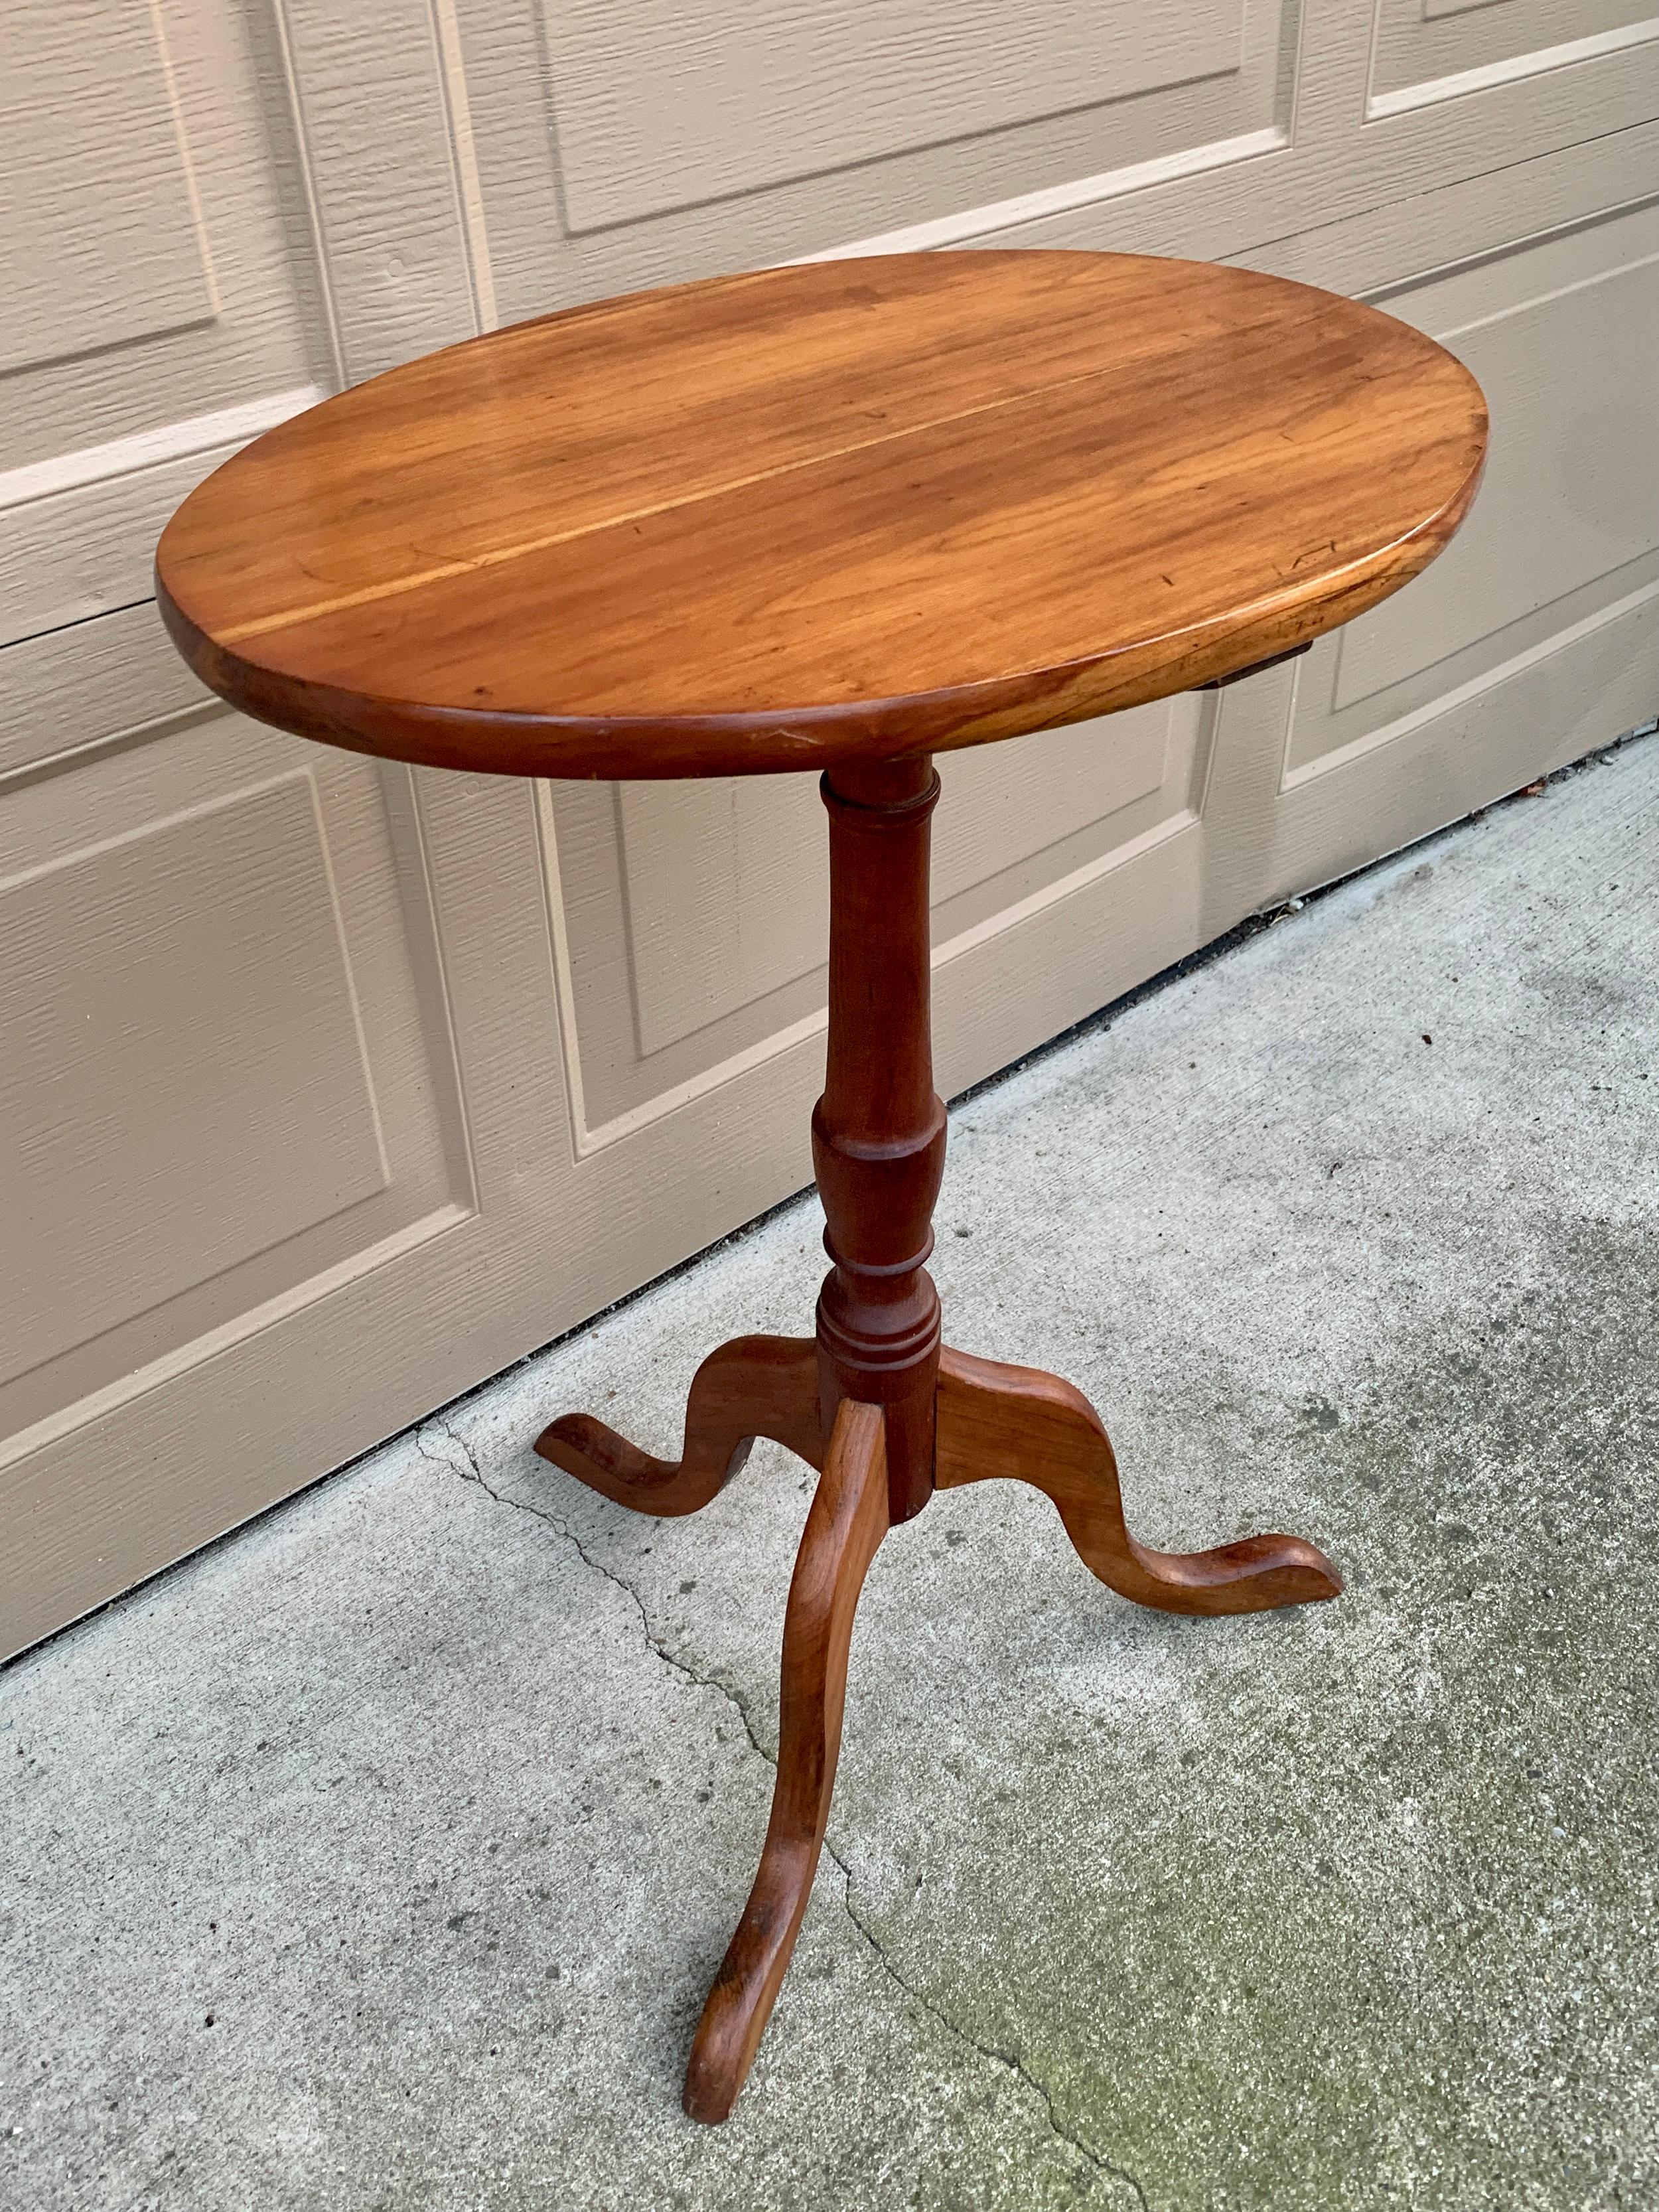 Antique American Colonial Cherry Candle Stand or Side Table, Mid 19th Century 1